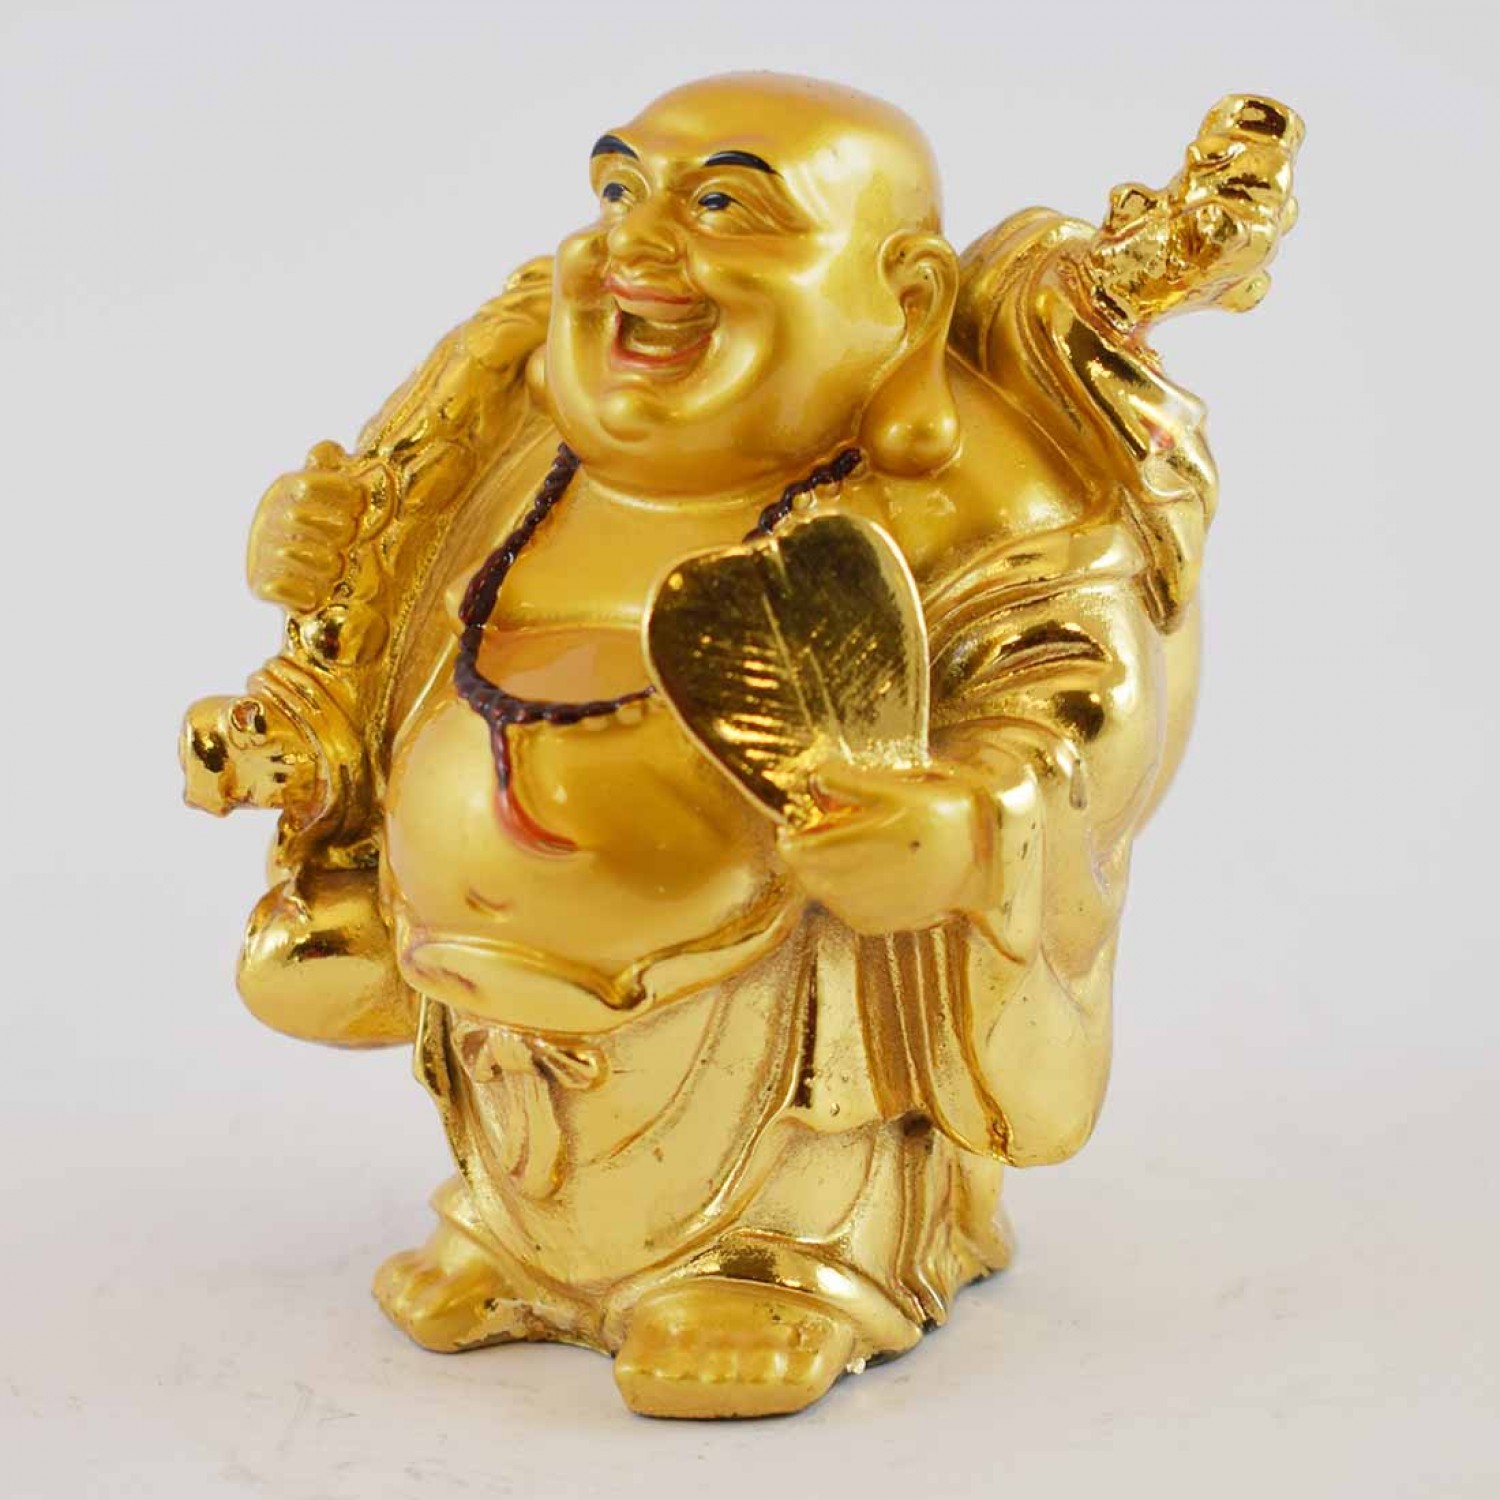 Handmade Golden Small Laughing Buddha Statue Holding Fan Banishes